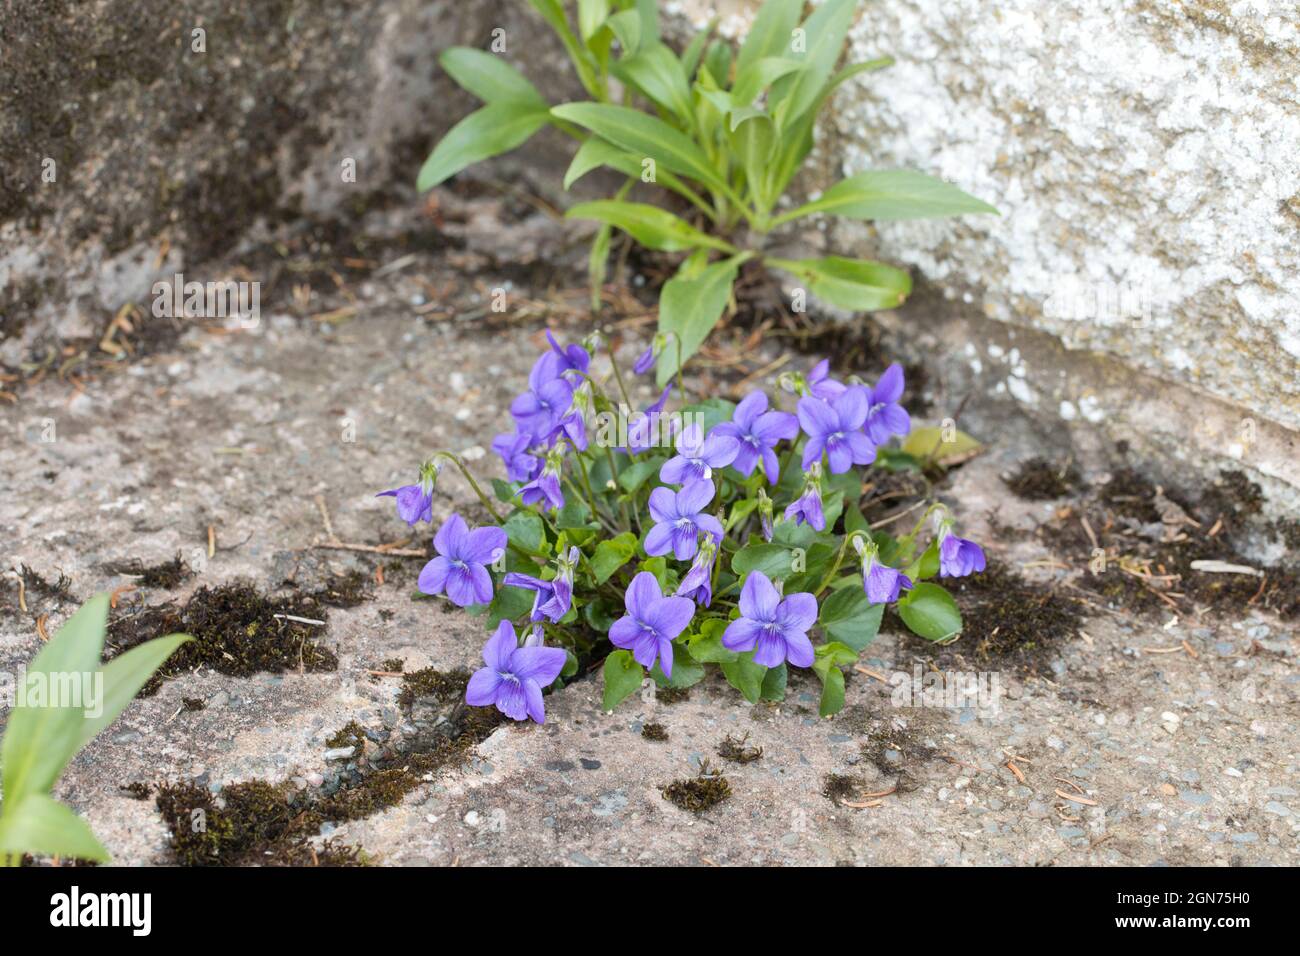 Common Dog-violet (Viola riviniana) flowering . Growing through a crack in concrete in a garden. Powys, Wales. April. Stock Photo